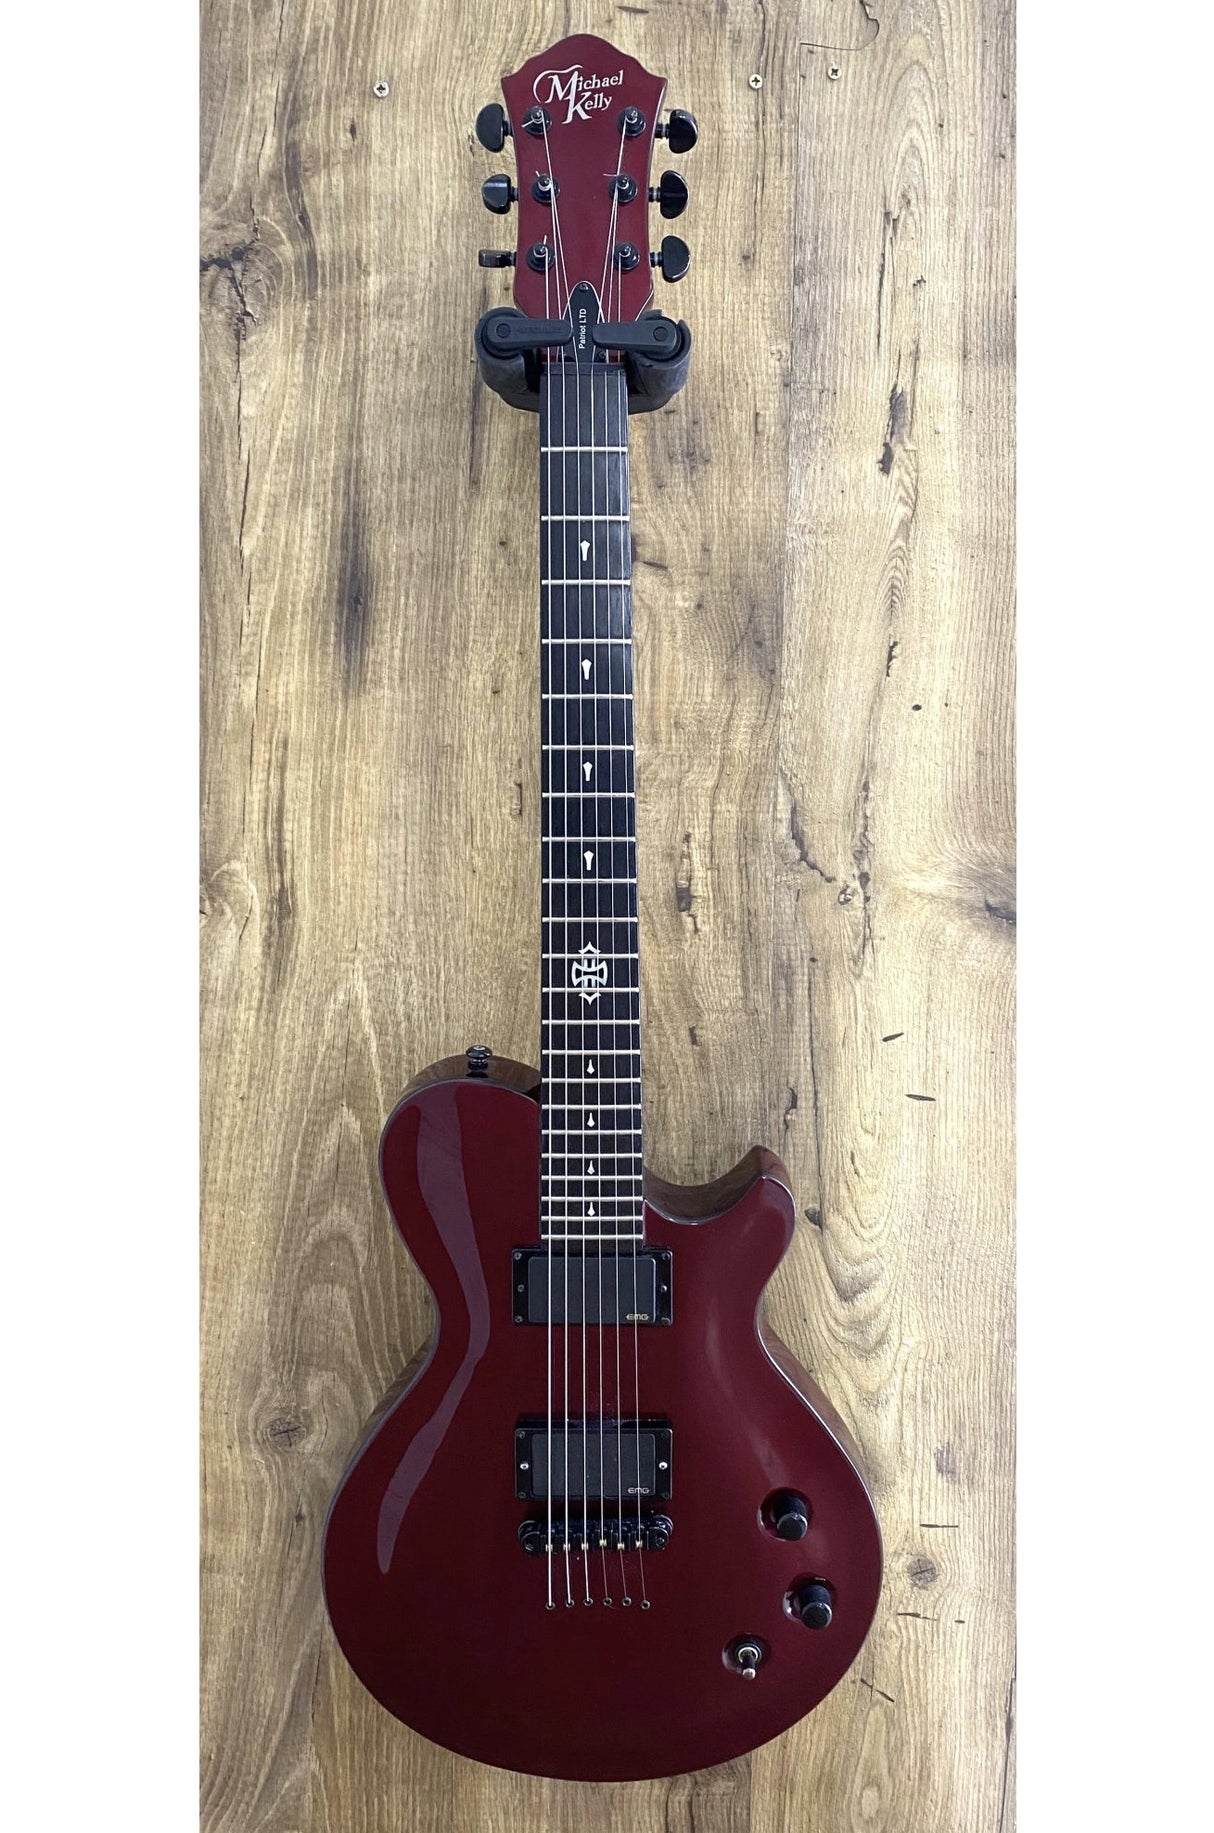 Michael Kelly Patriot Limited Blood Red